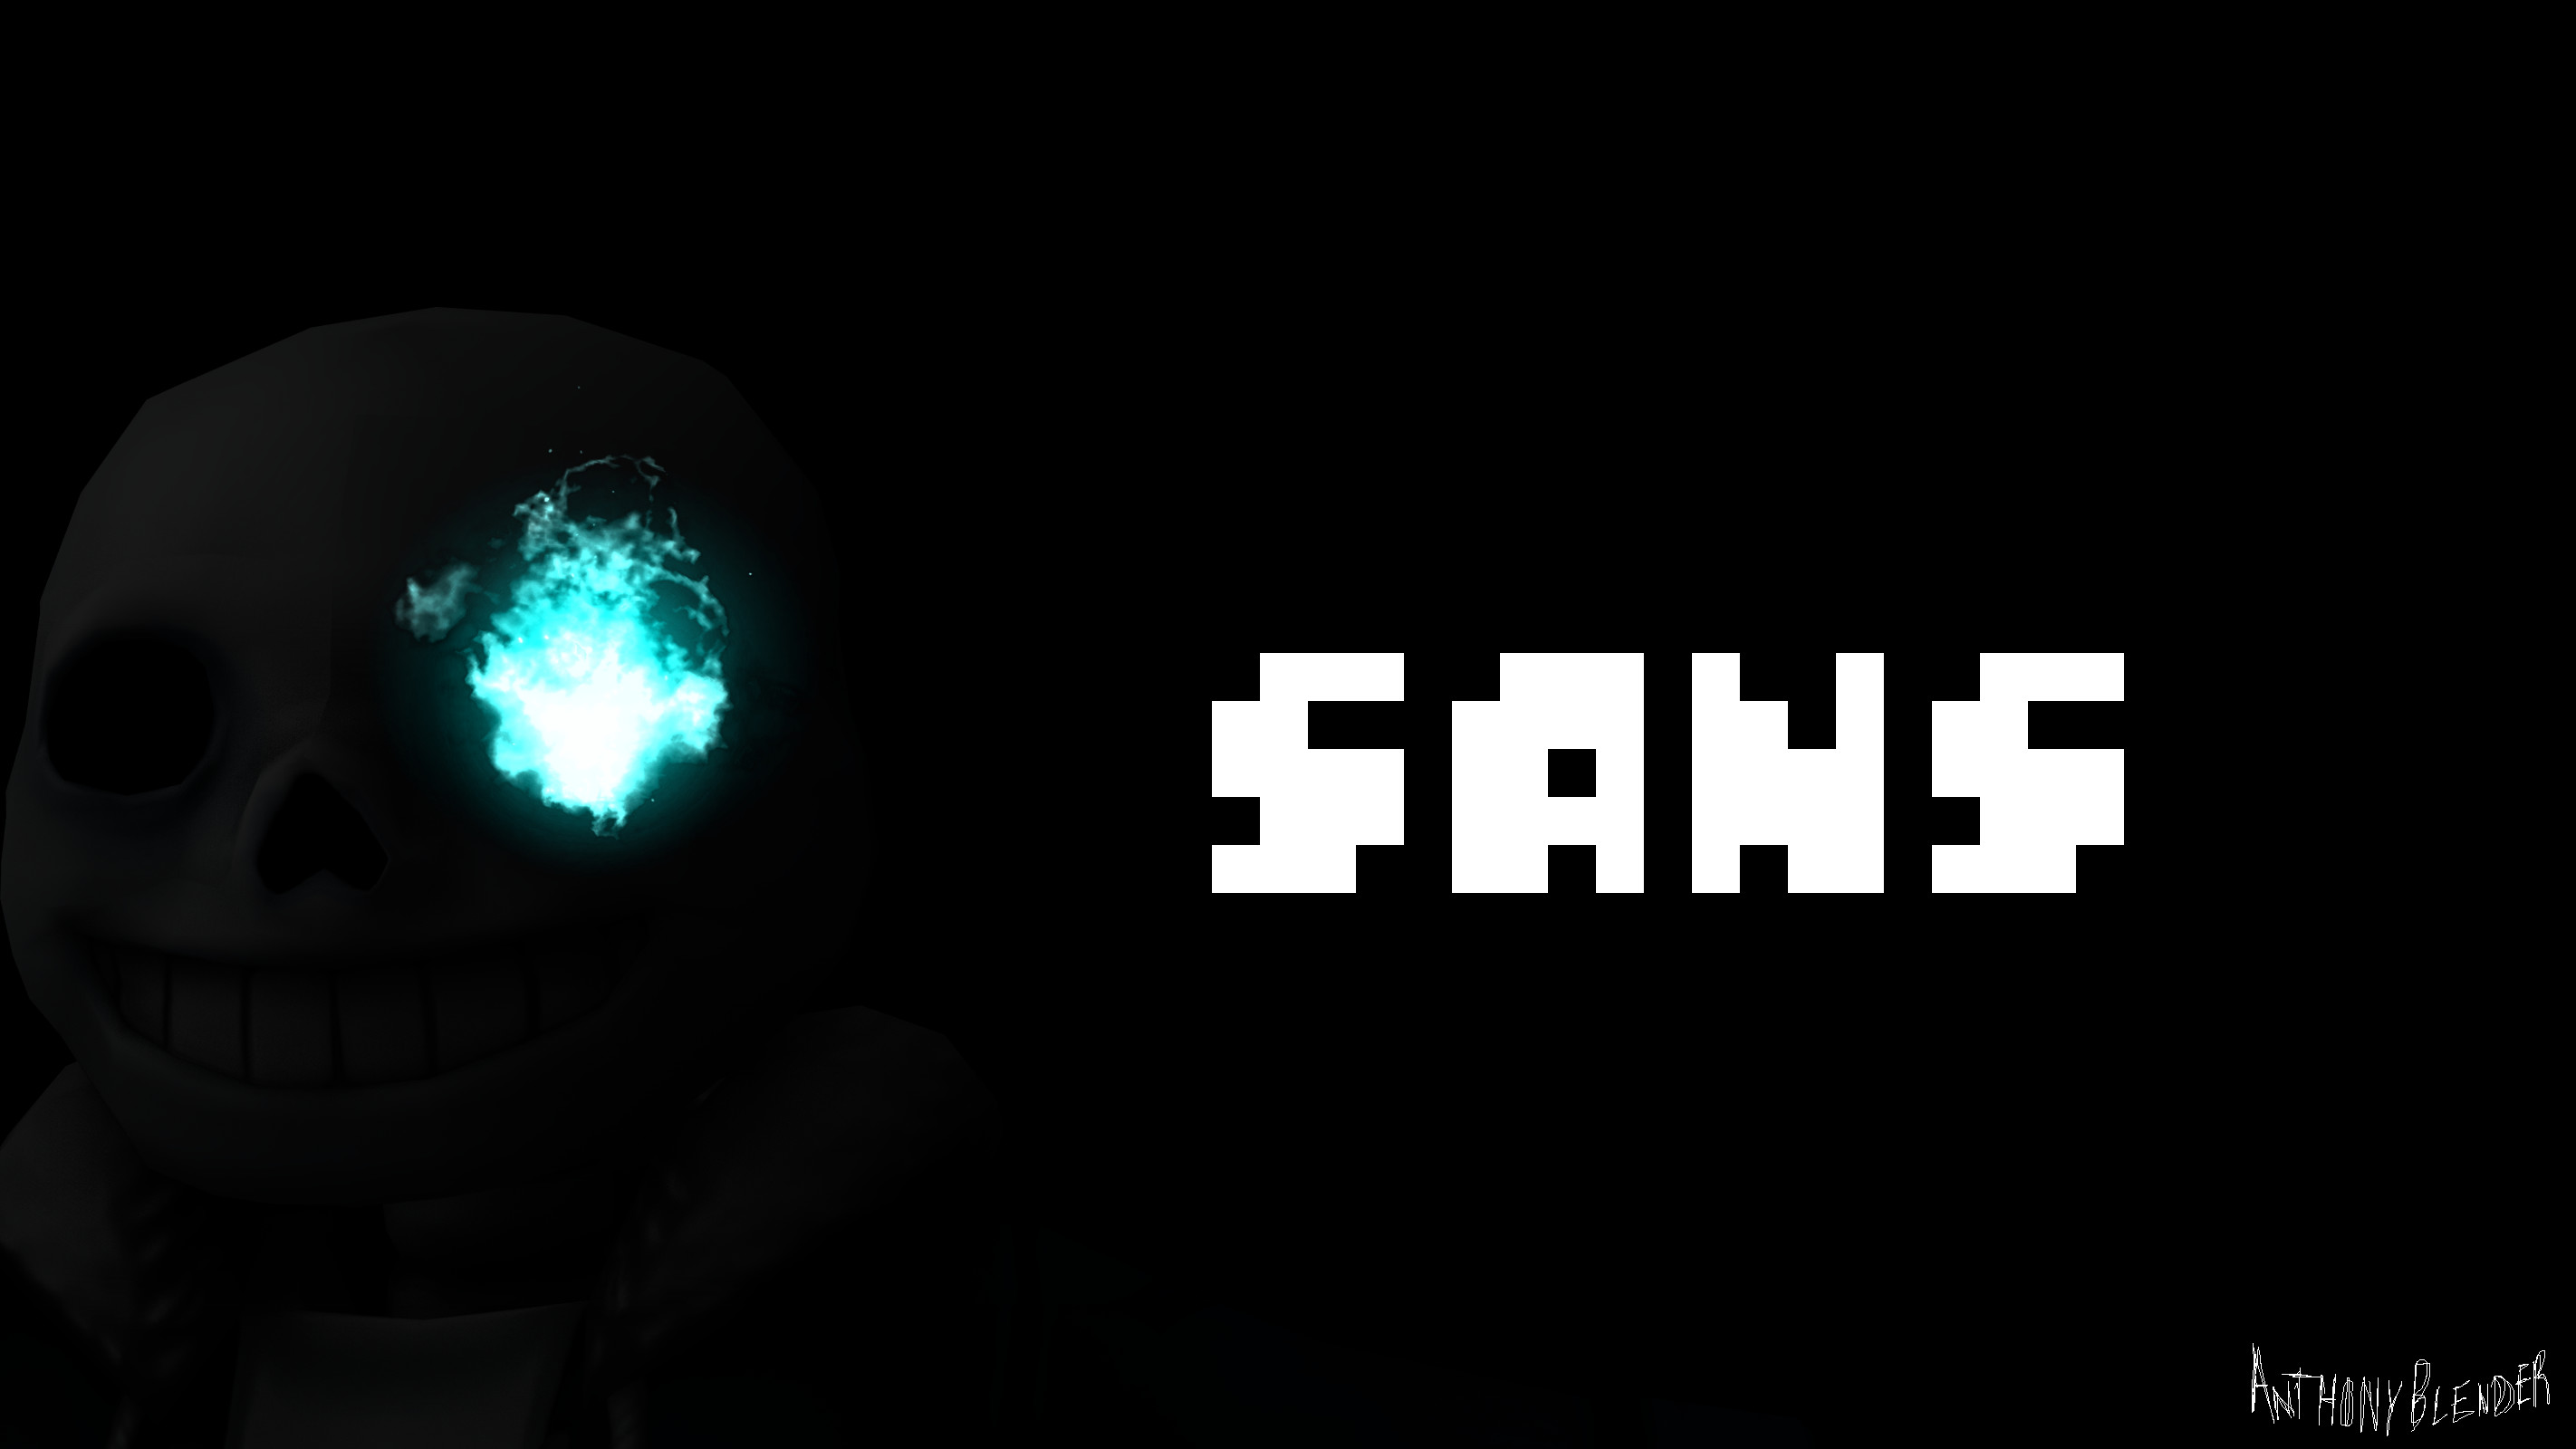 2844x1600 Undertale - Both Sides of Sans [HD Wallpaper] by Phione538 on .